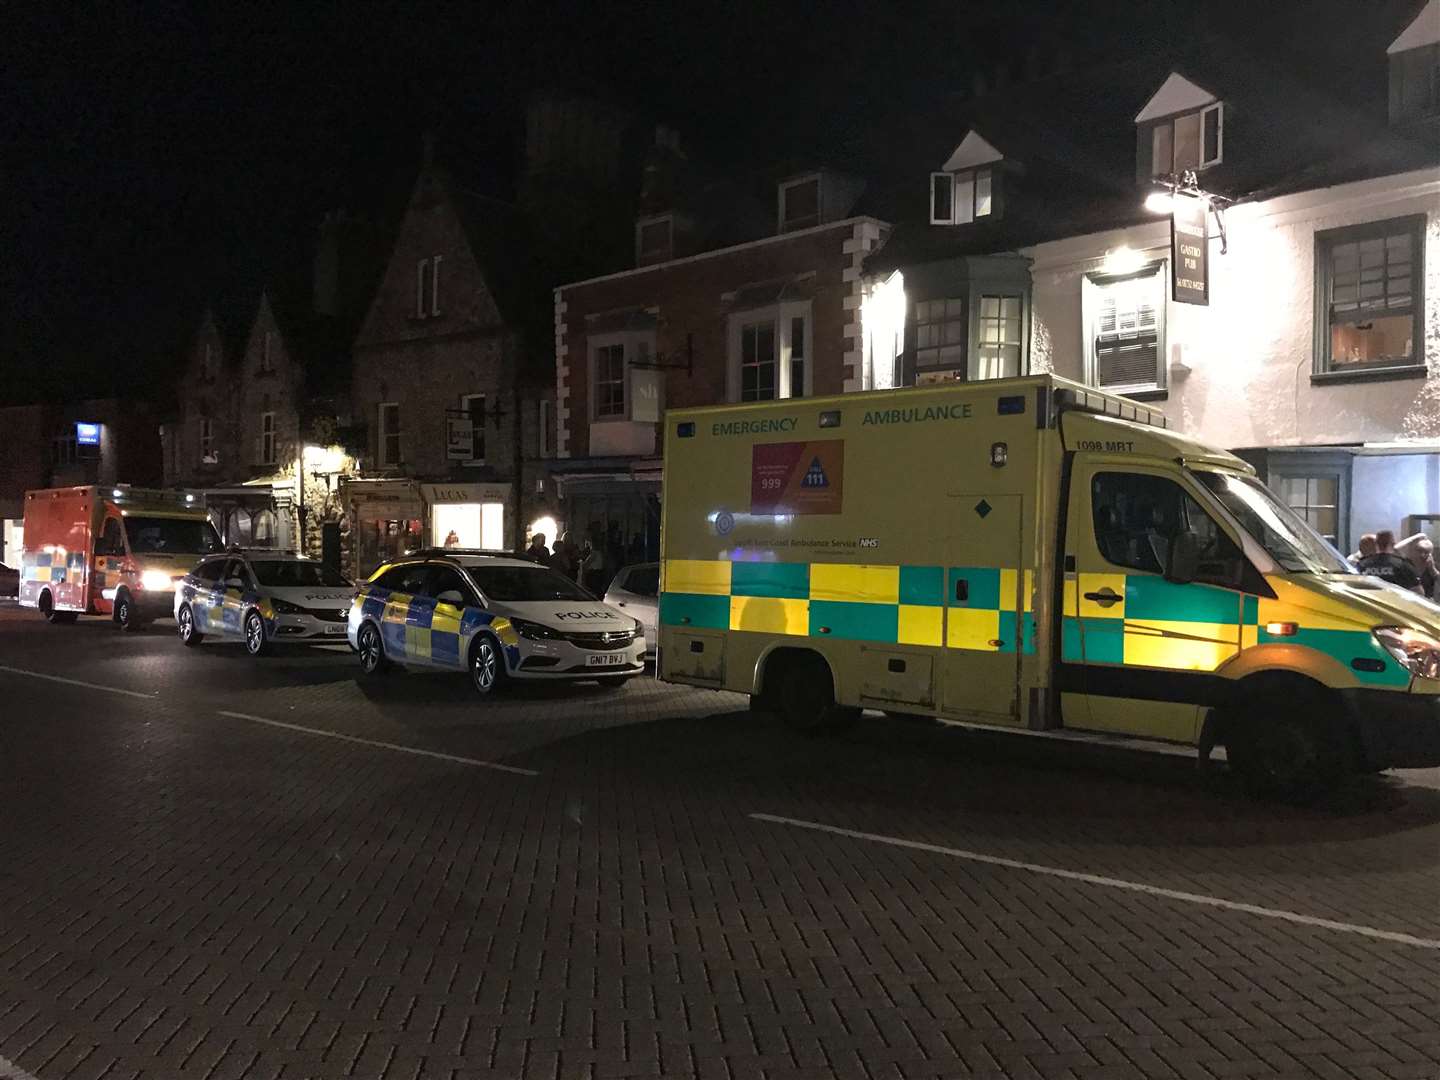 Police were called following a brawl at the pub in August